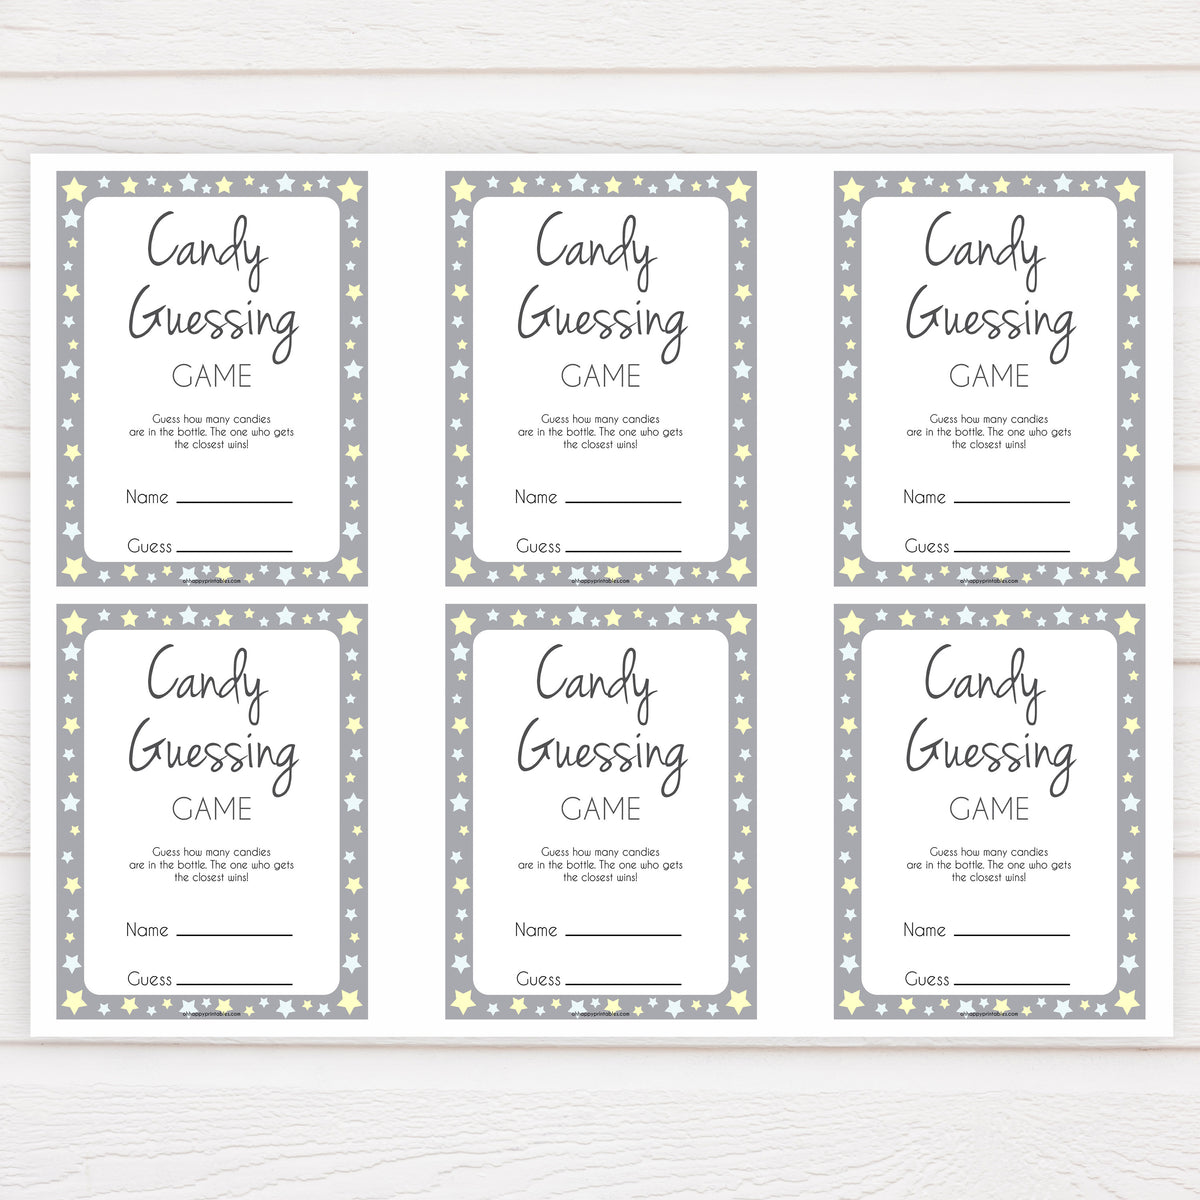 candy-guessing-game-template-martin-printable-calendars